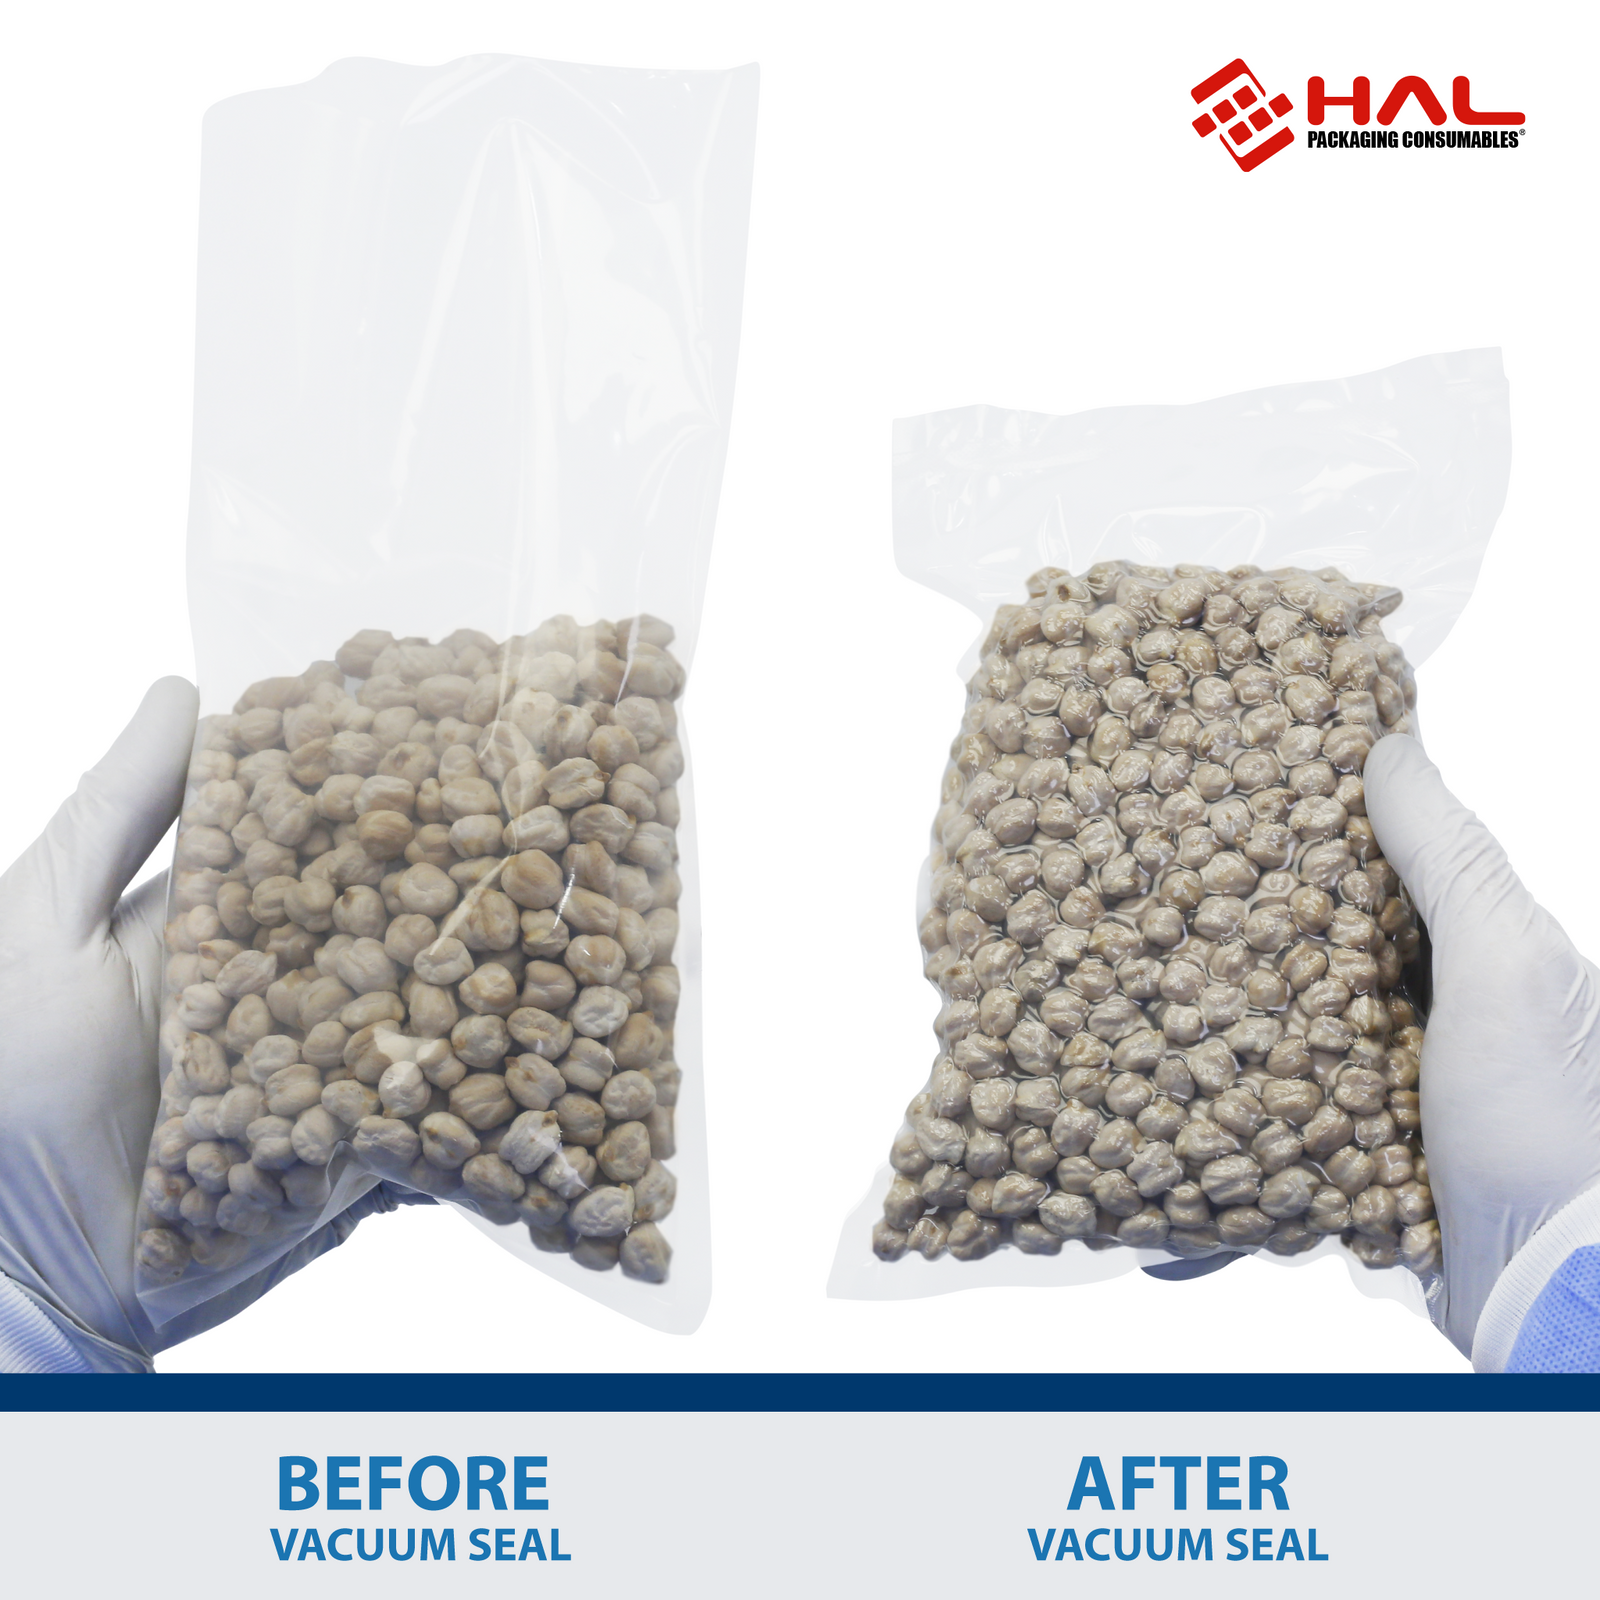 Image shows the hands of a person showing the before and after of one HAL bag unsealed with chickpeas inside and then the same bag vacuumed sealed. 